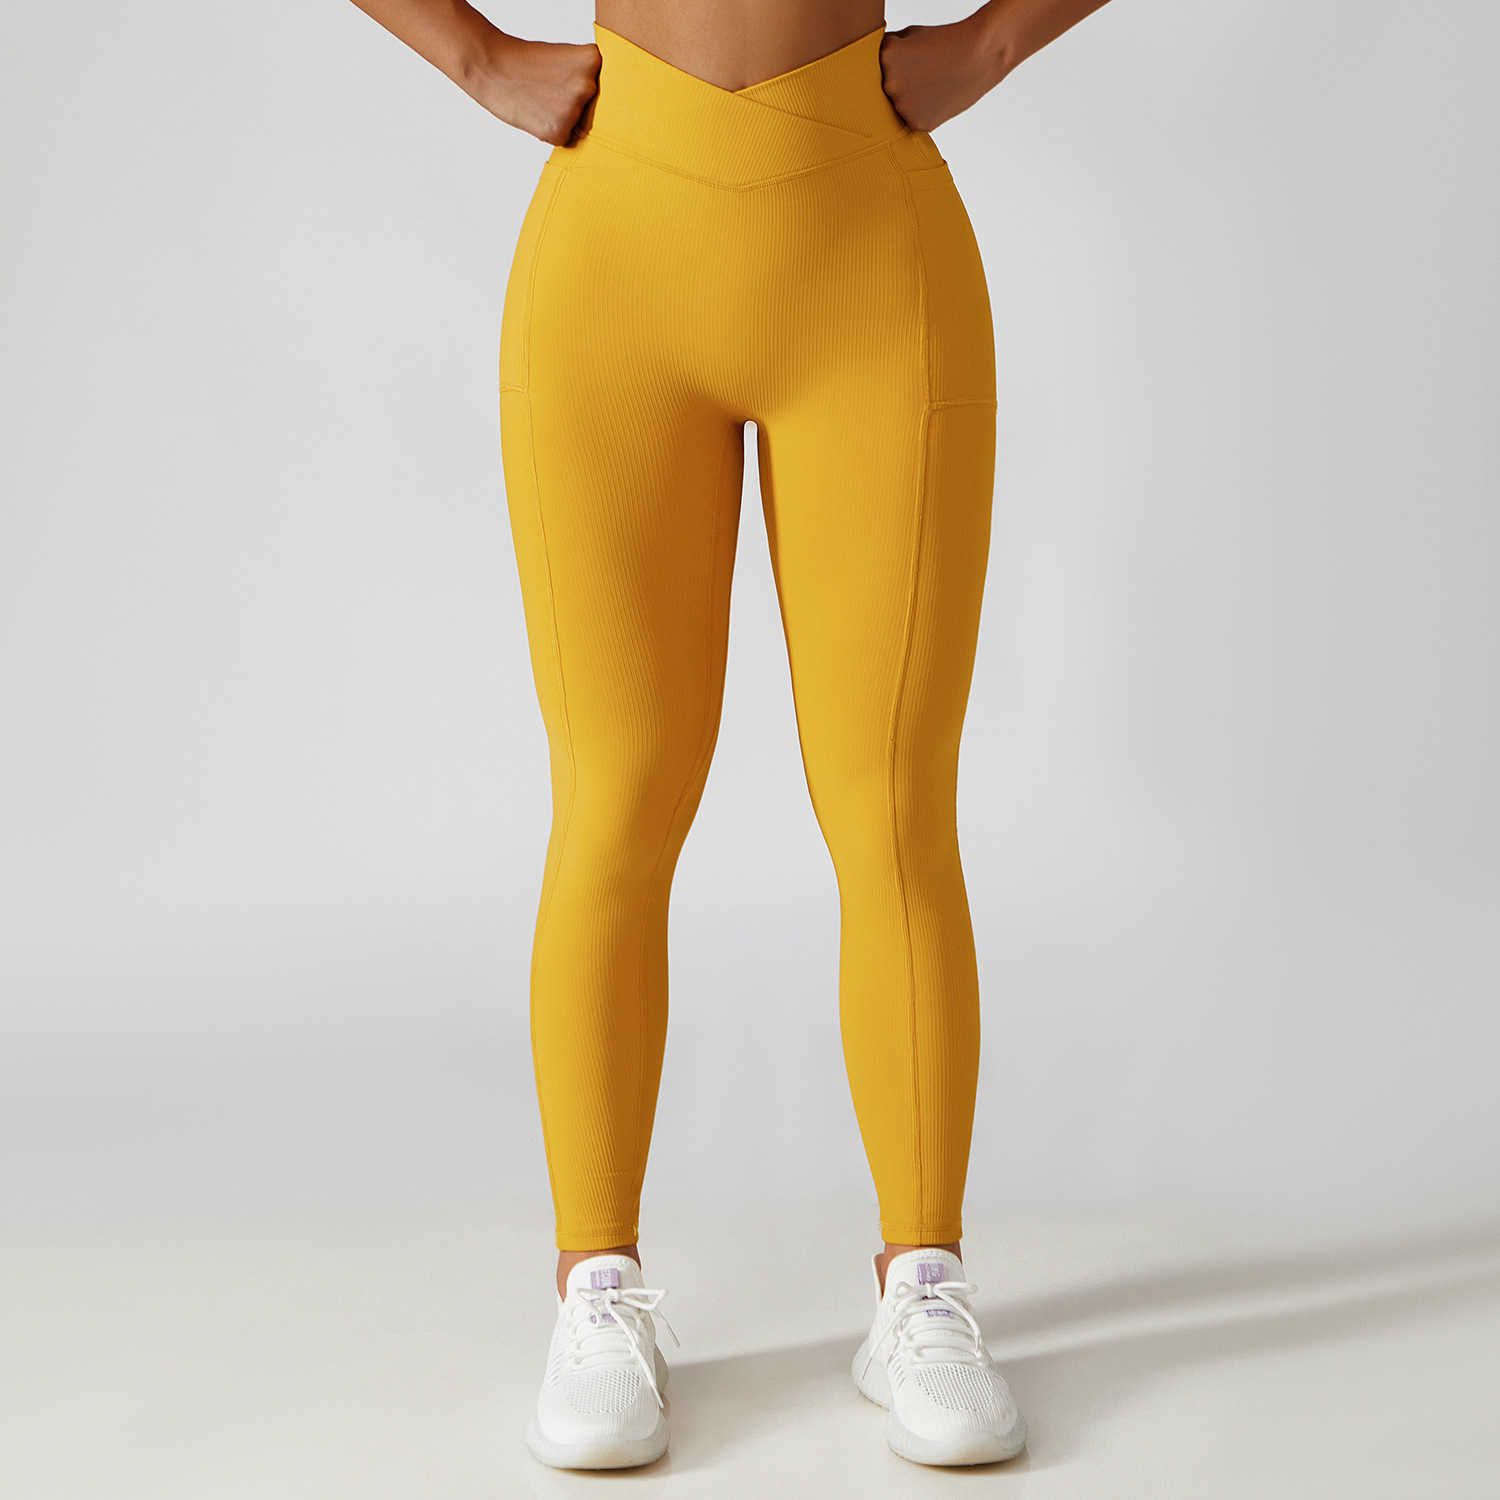 pants-curry yellow